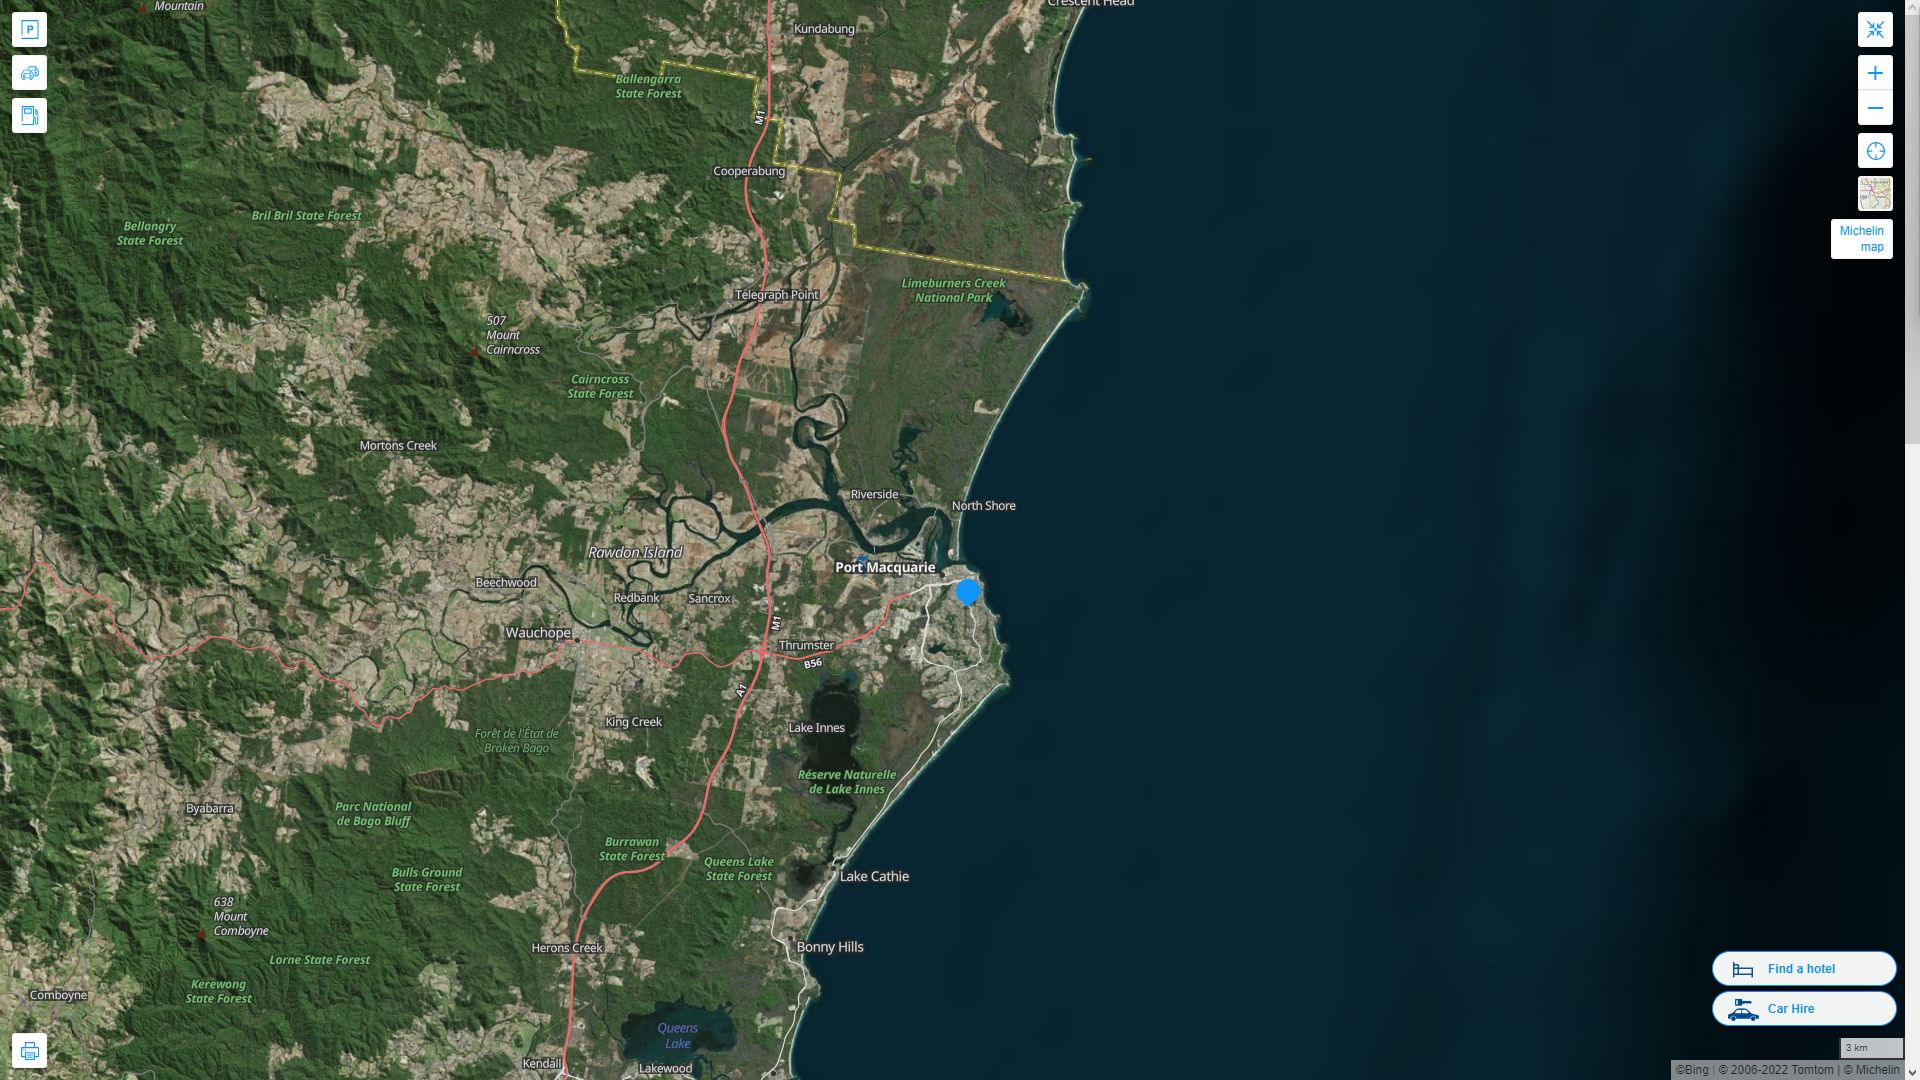 Port Macquarie Highway and Road Map with Satellite View